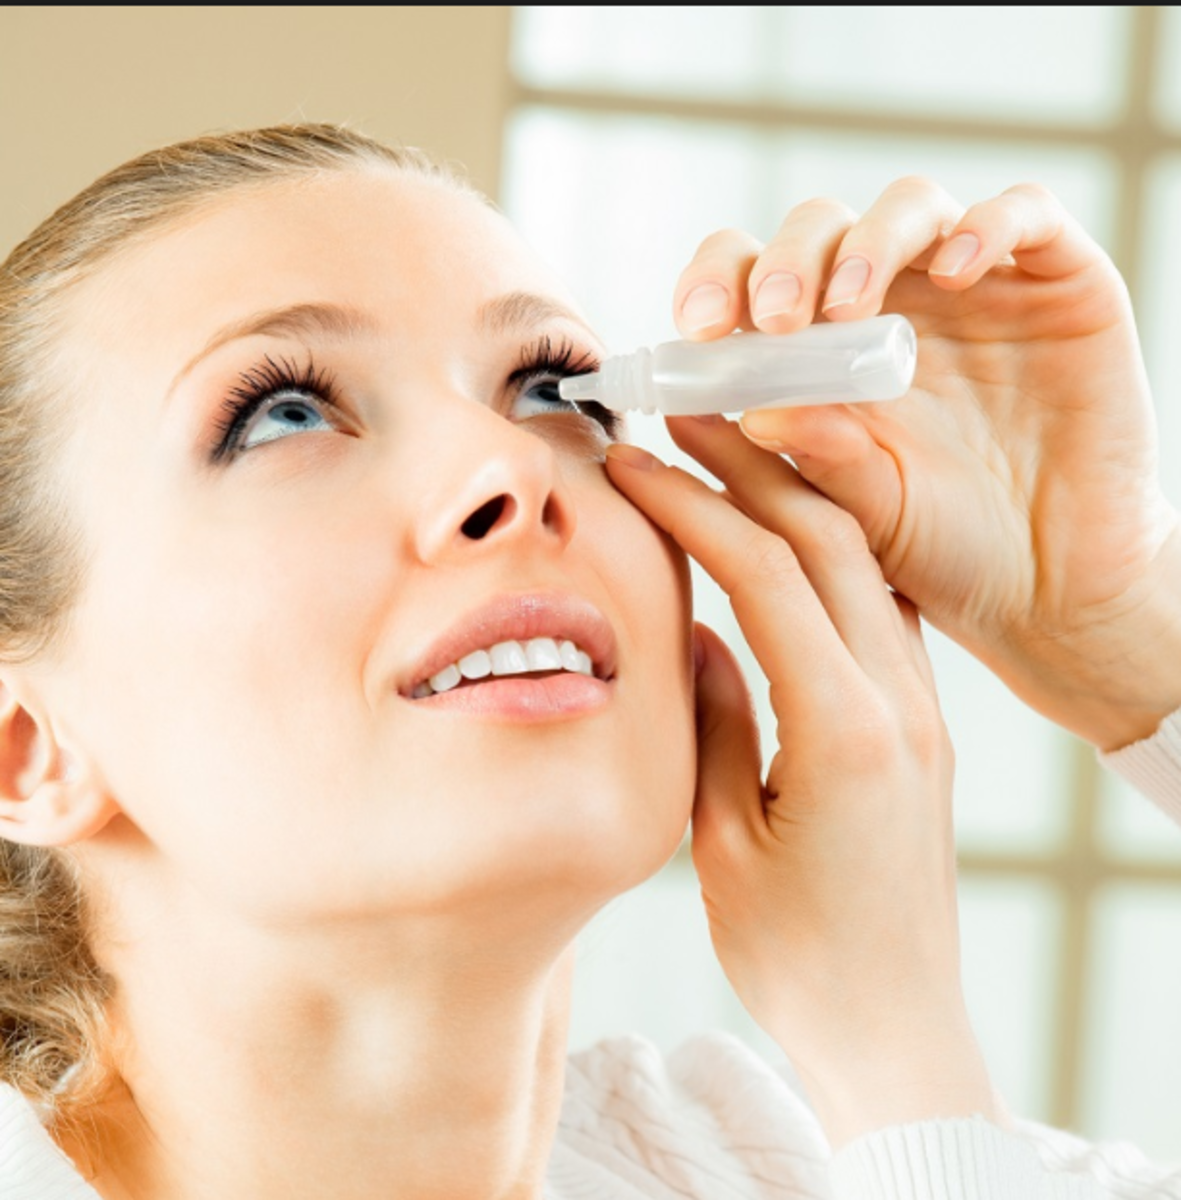 Using eye drops several times per day becomes  normal with Sjogren's.